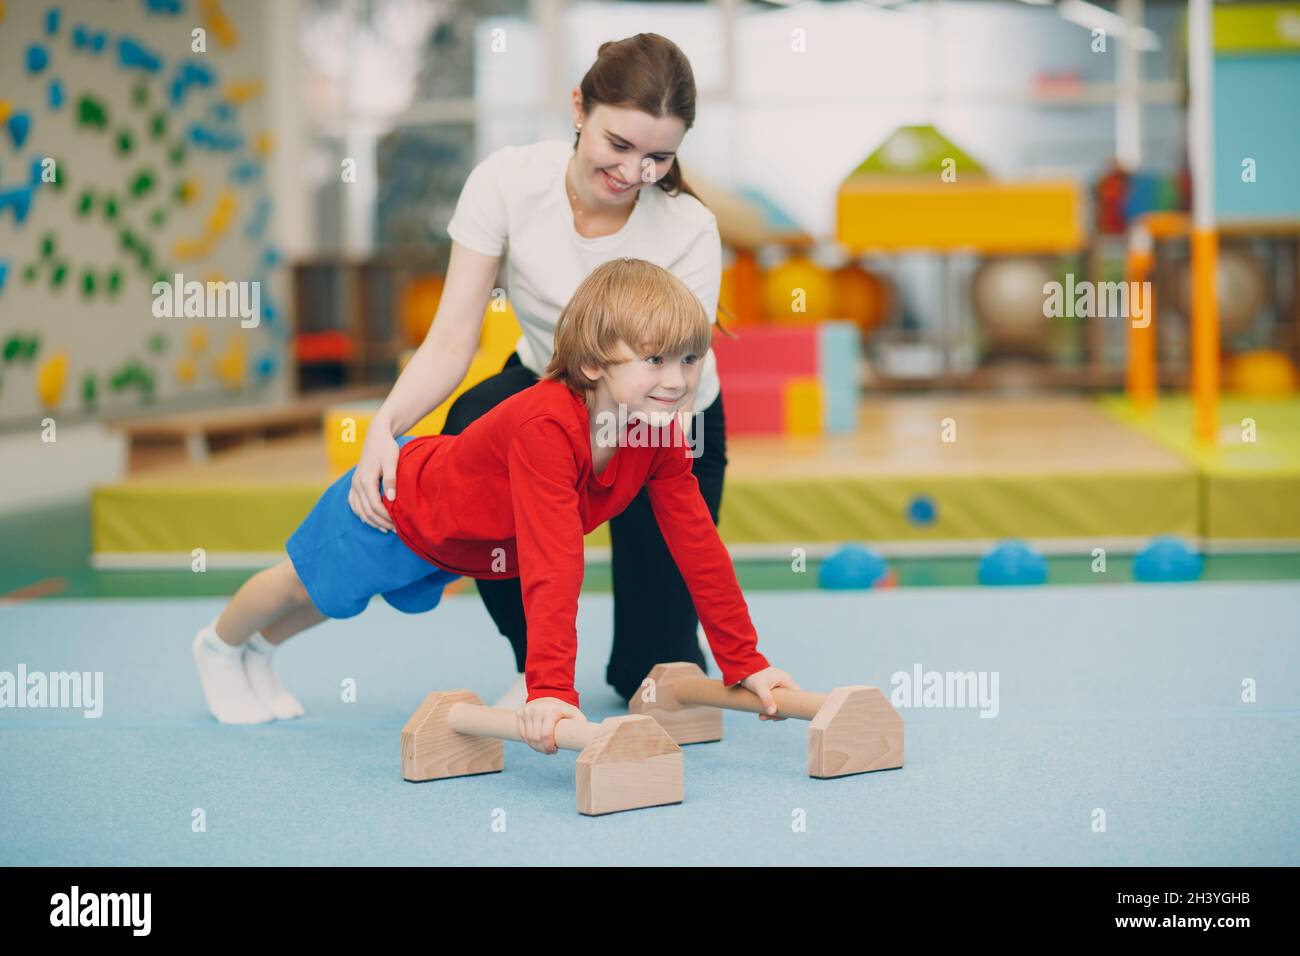 Kids doing exercises push up in gym at kindergarten or elementary school. Children sport and fitness concept. Stock Photo